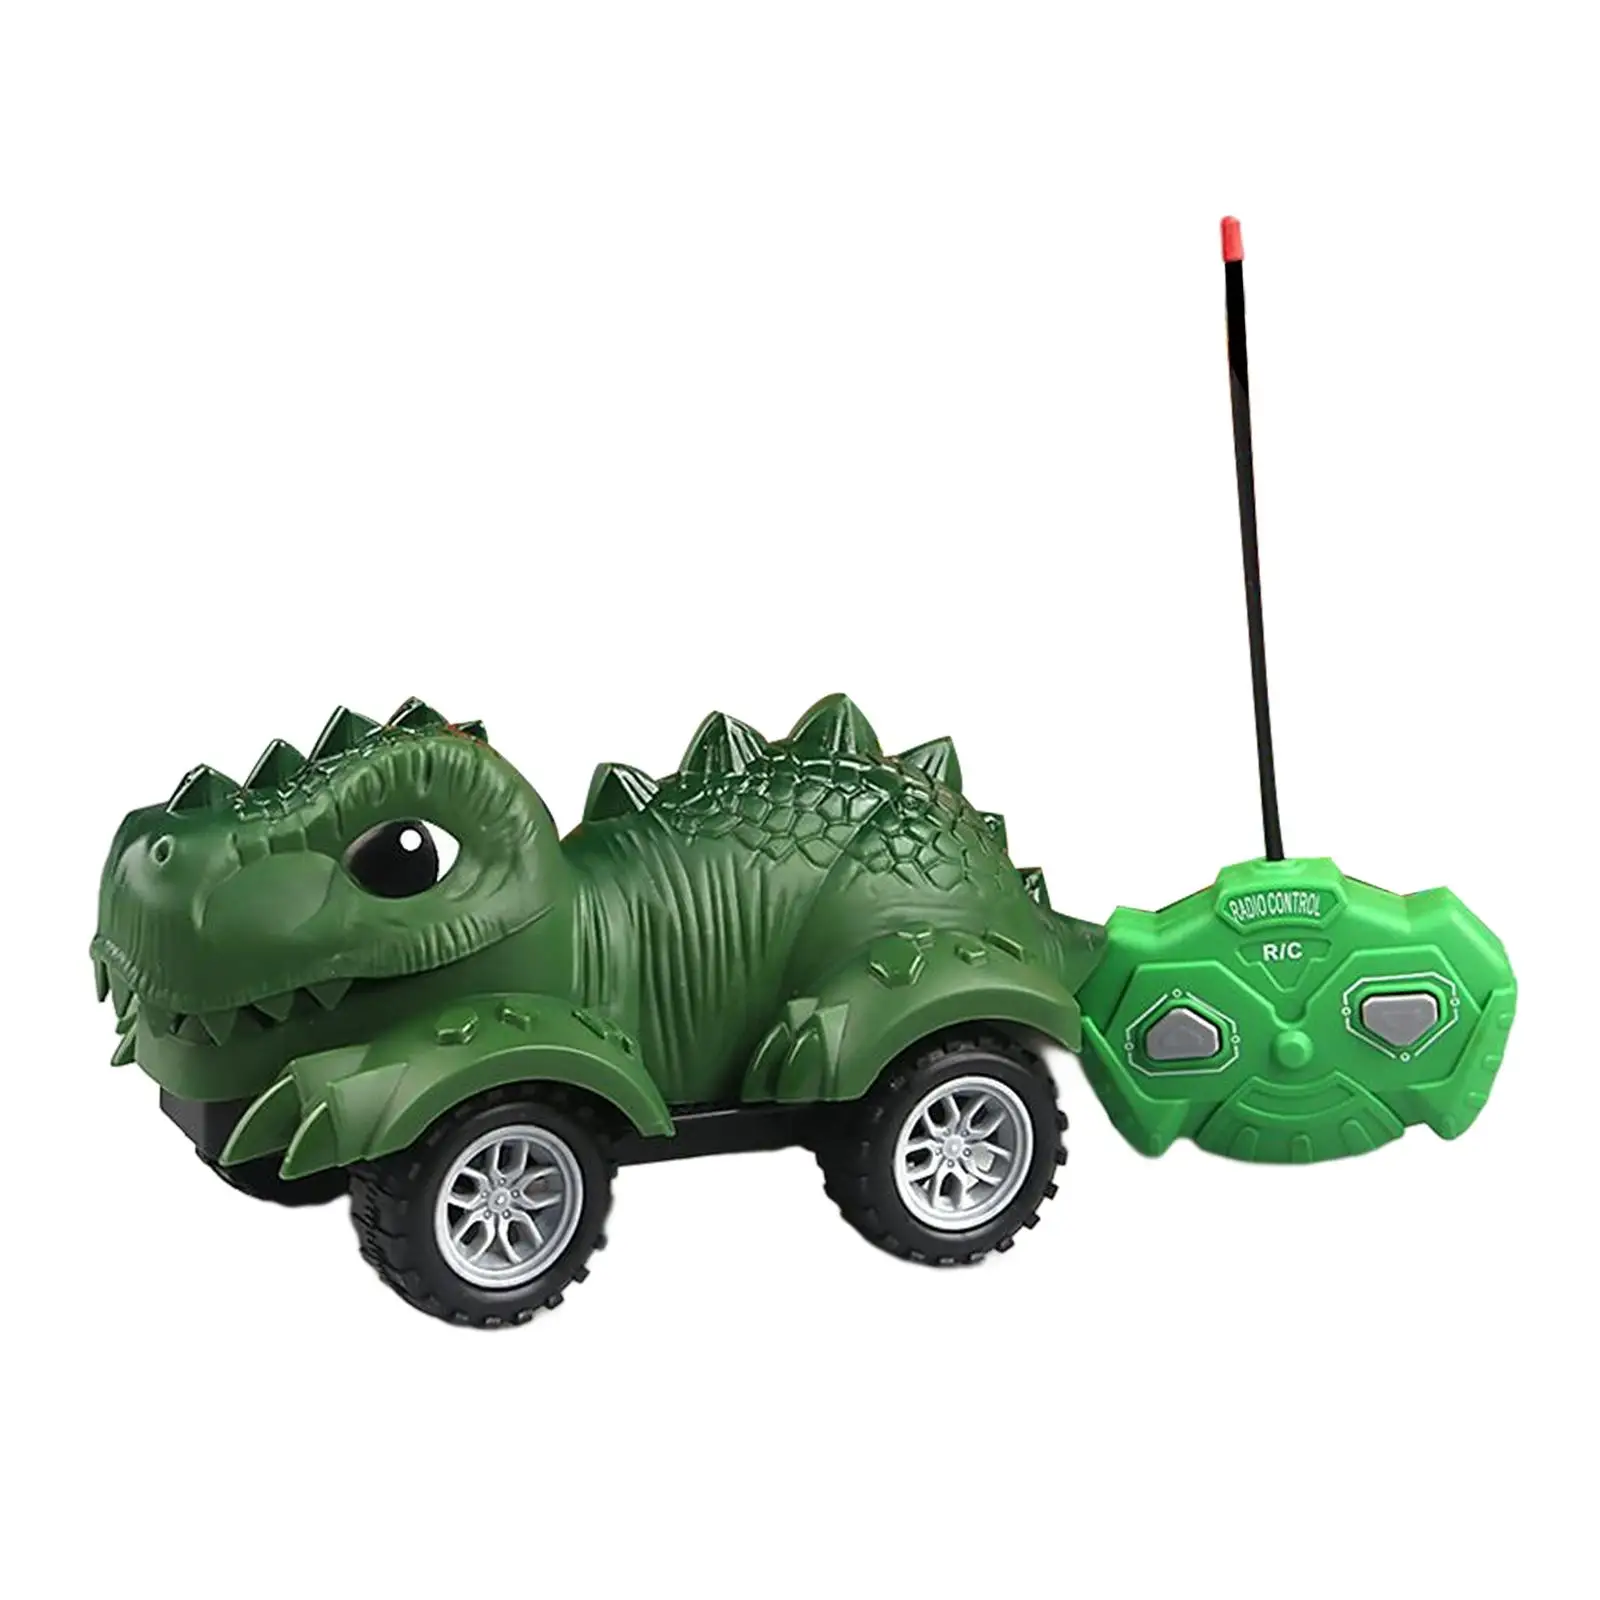 Fun Dinosaur Toy car Trucks Learning Educational Toys Battery Operated Toy Vehicle for Christmas Gifts Party Favors Boys